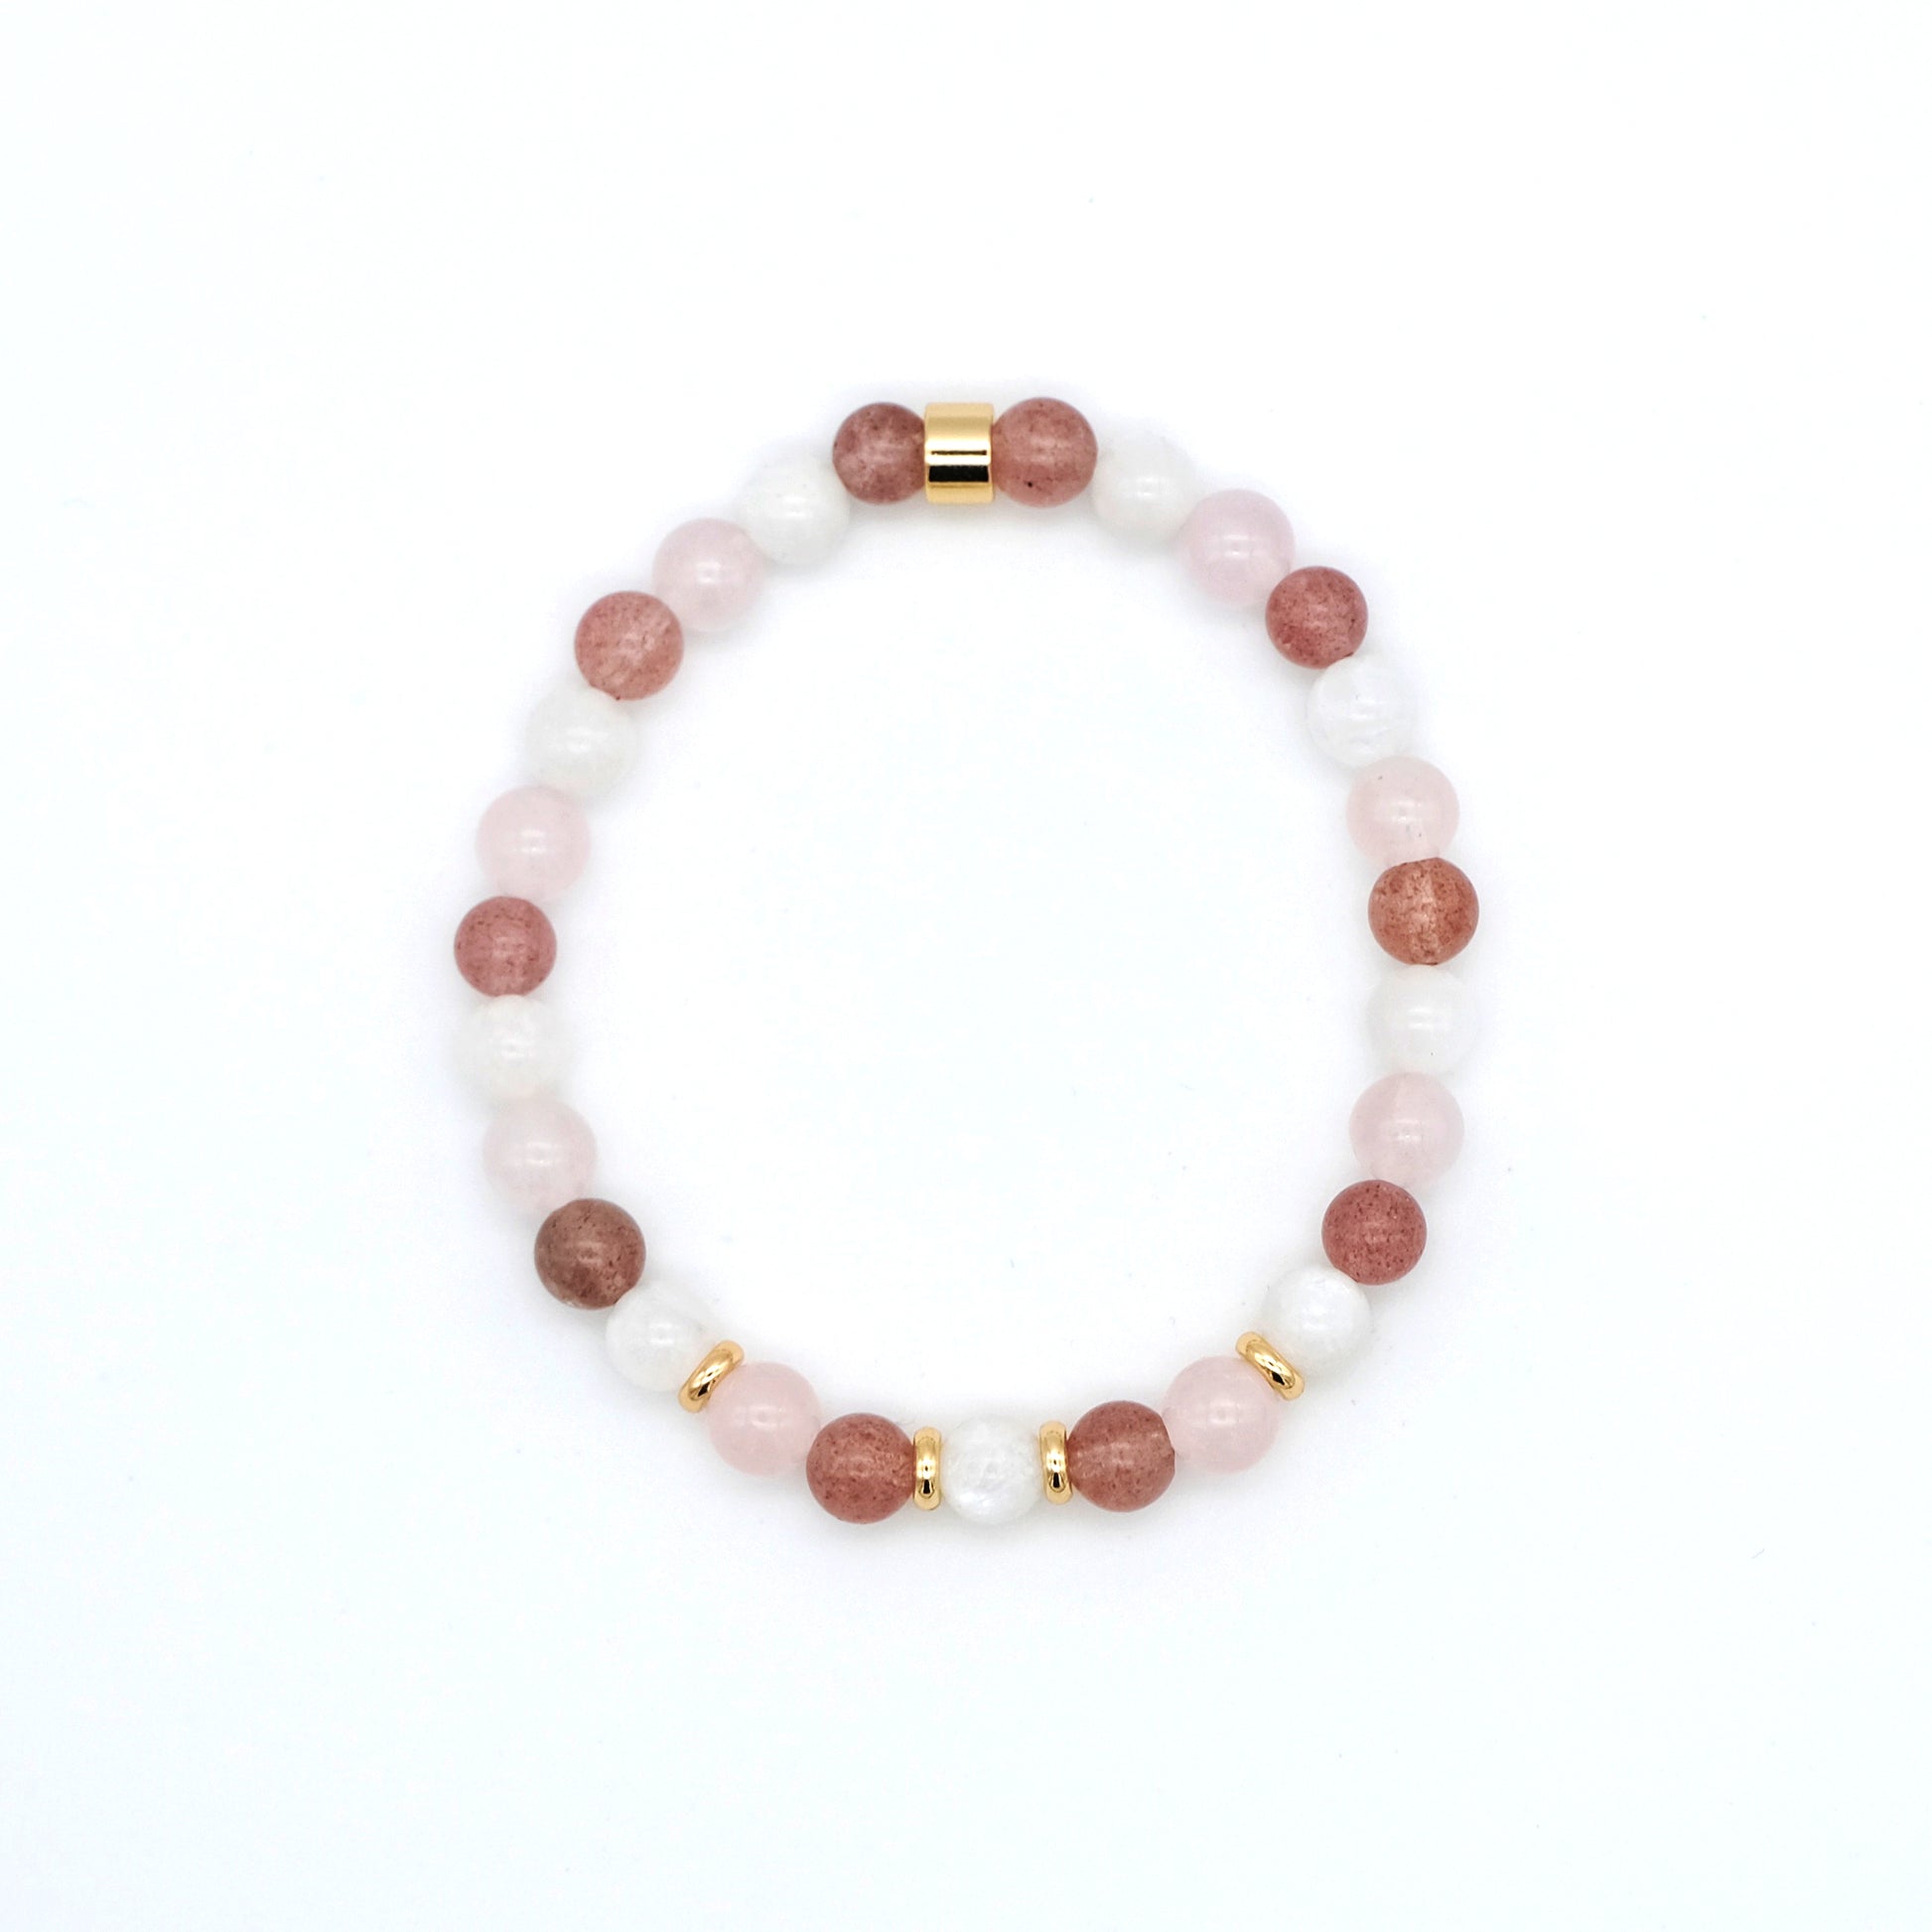 A moonstone, strawberry quartz and rose quartz gemstone bracelet in 6mm beads with gold accessories from above